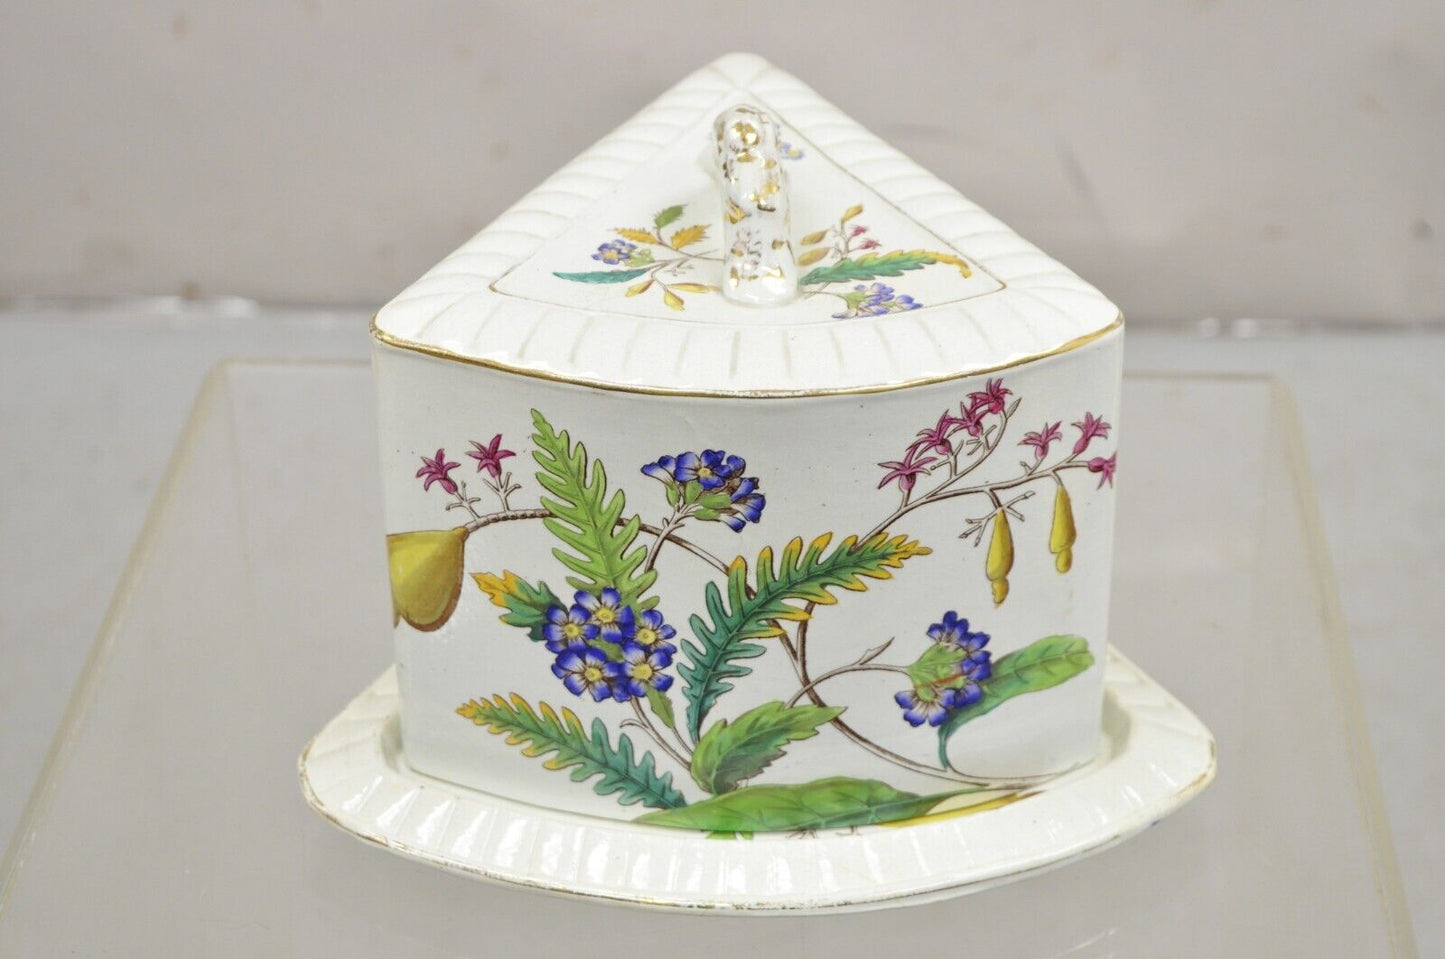 Antique Victorian Large Porcelain Covered Cheese Dish with Flowers and Leaves